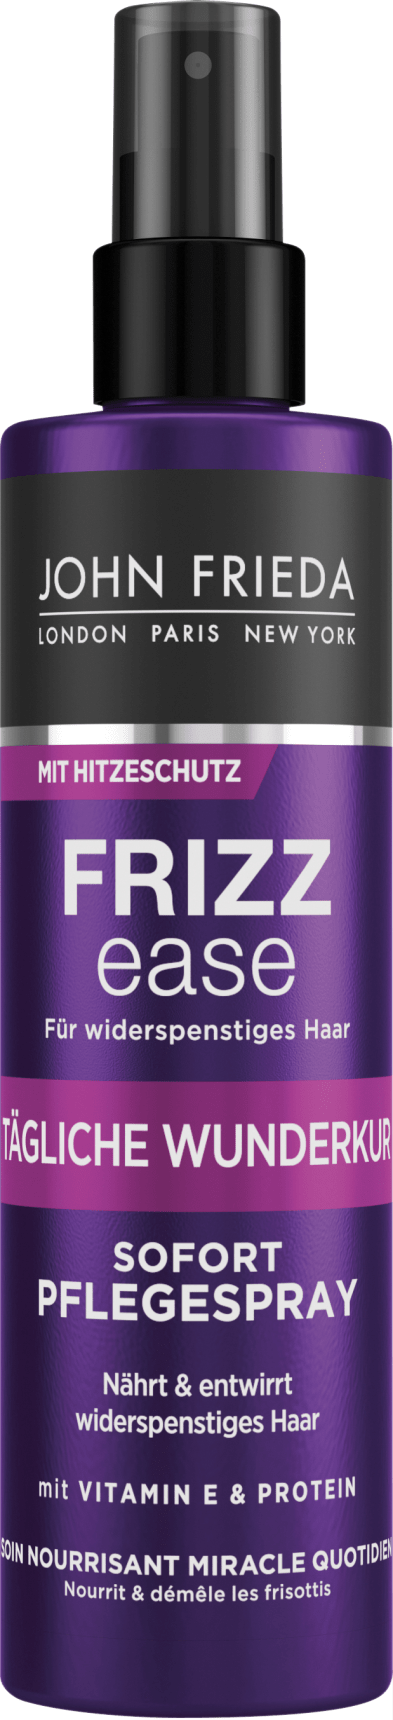 Immediate Care Spray Frizz Ease Daily Miracle Cure, 200 Ml